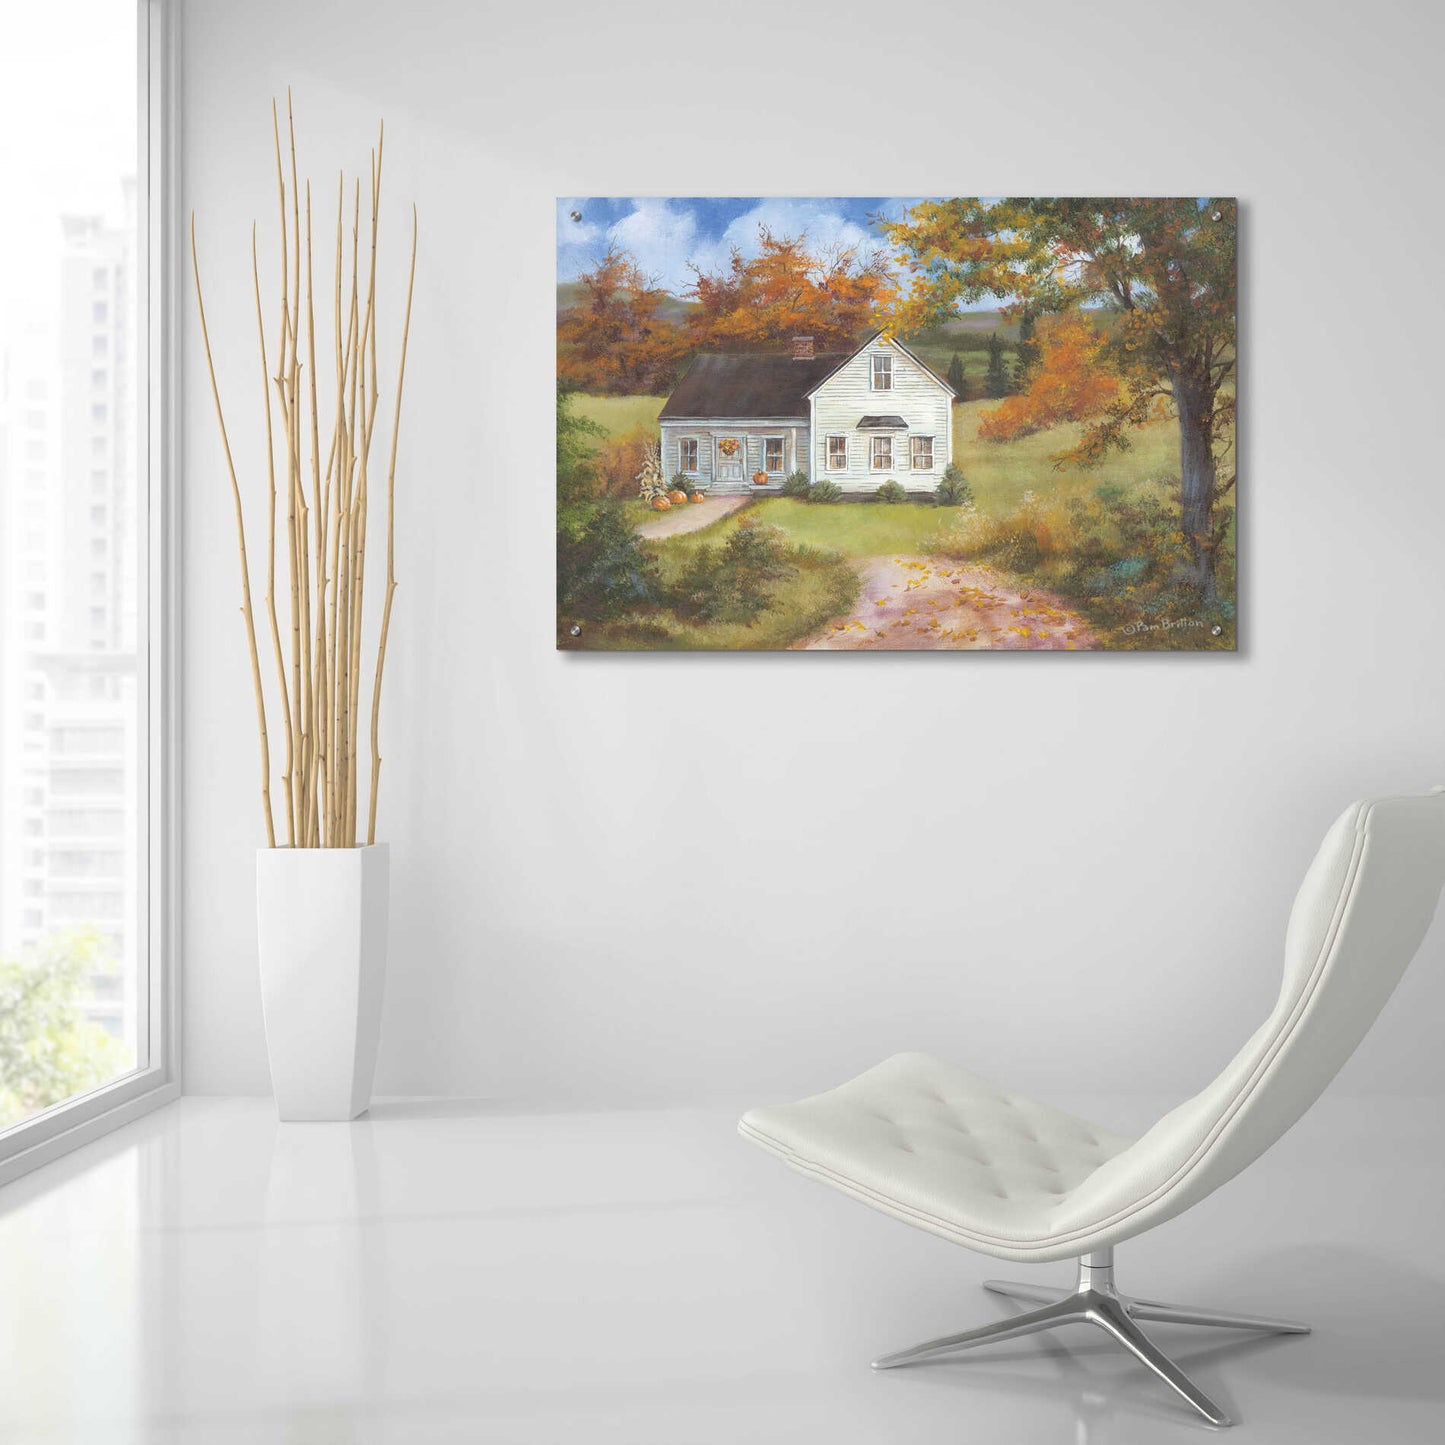 Epic Art 'Fall In The Country' by Pam Britton, Acrylic Glass Wall Art,36x24